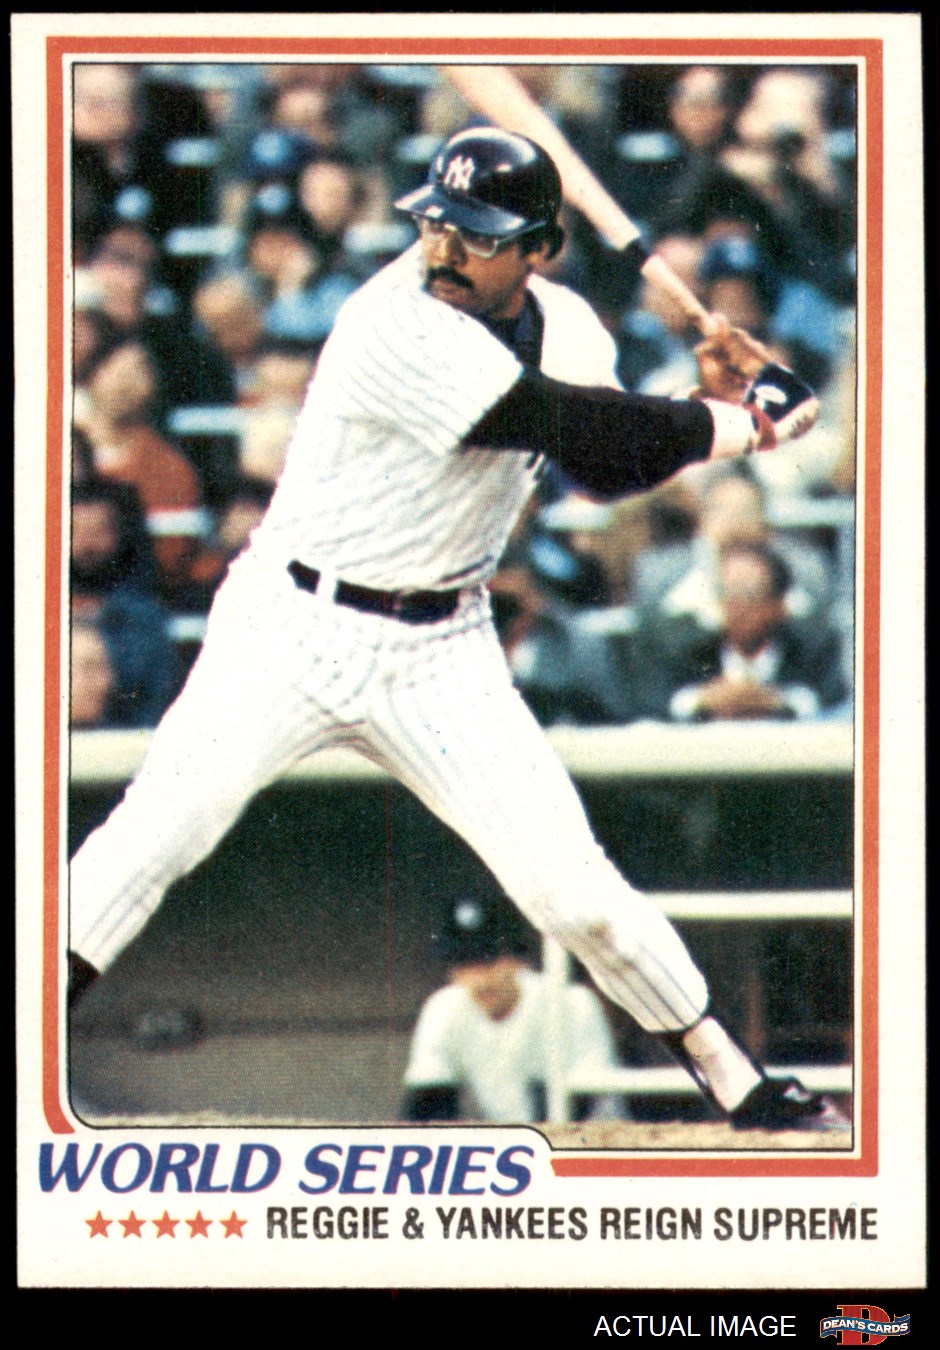 Proof this 1977 Topps Reggie Jackson card is a Colossal Juggernaut